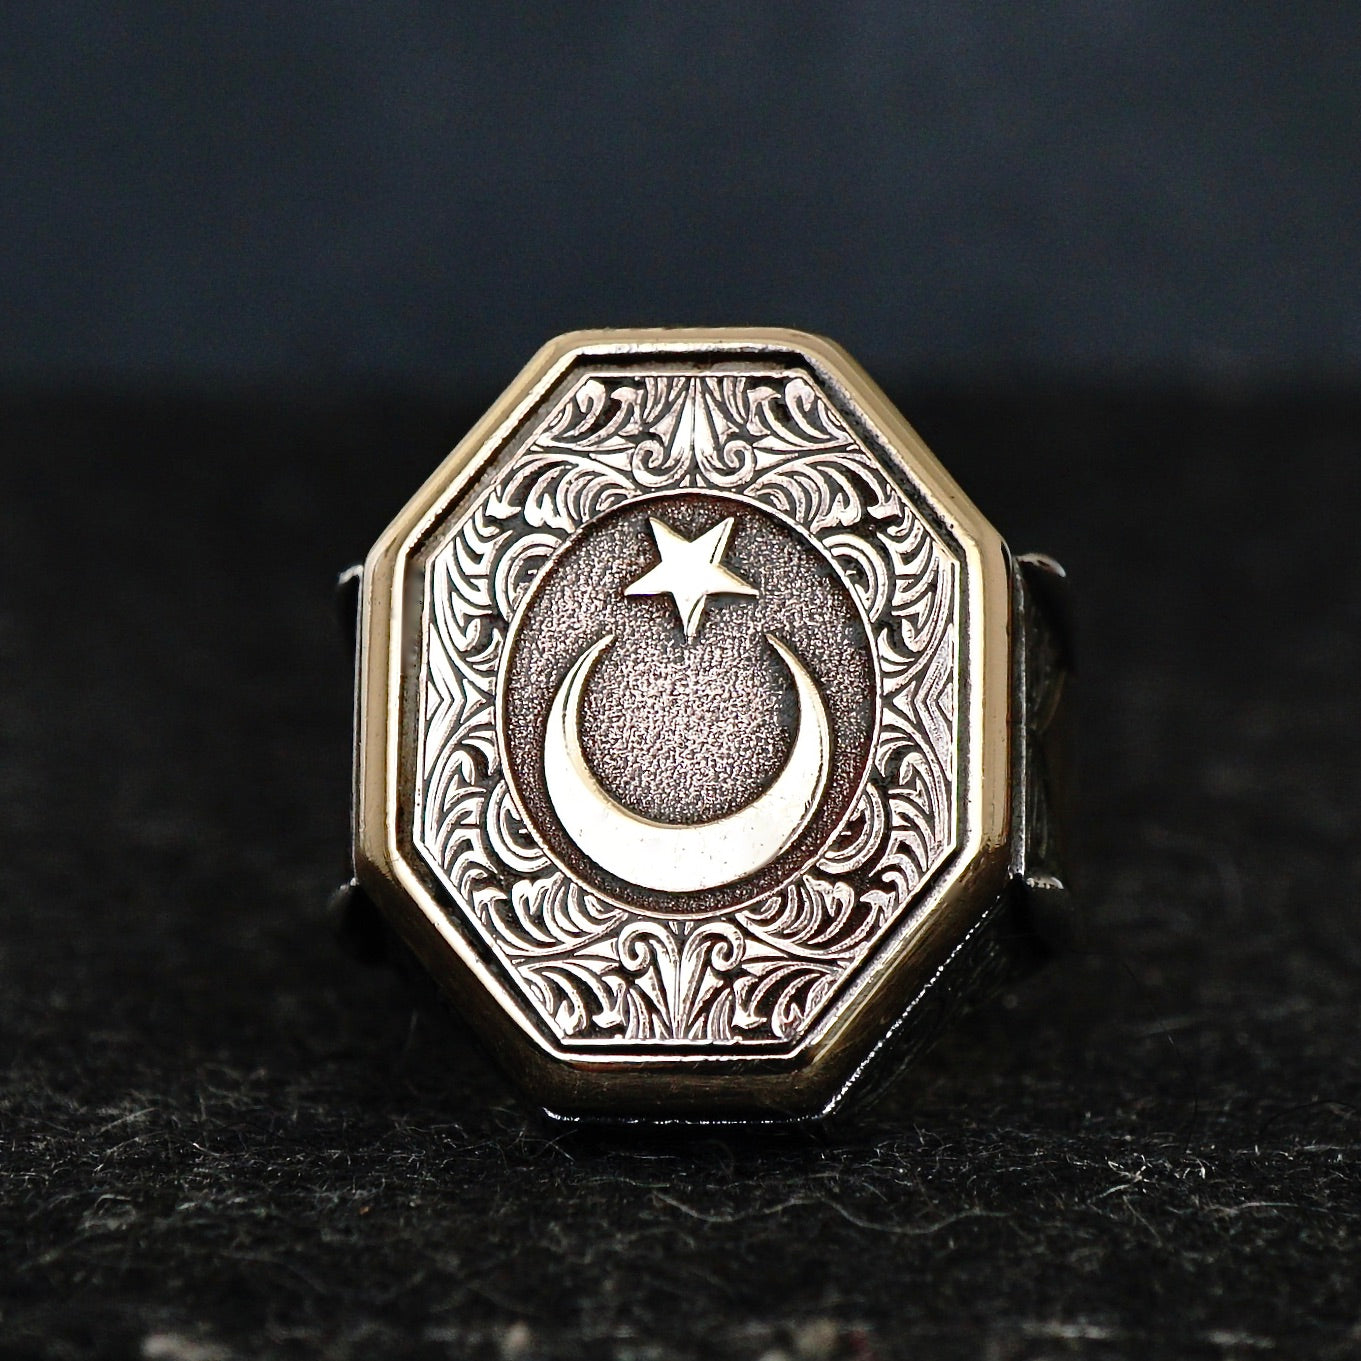 Sterling Silver Ring Crescent Star Engraved Turkish Ottoman Men's Jewelry